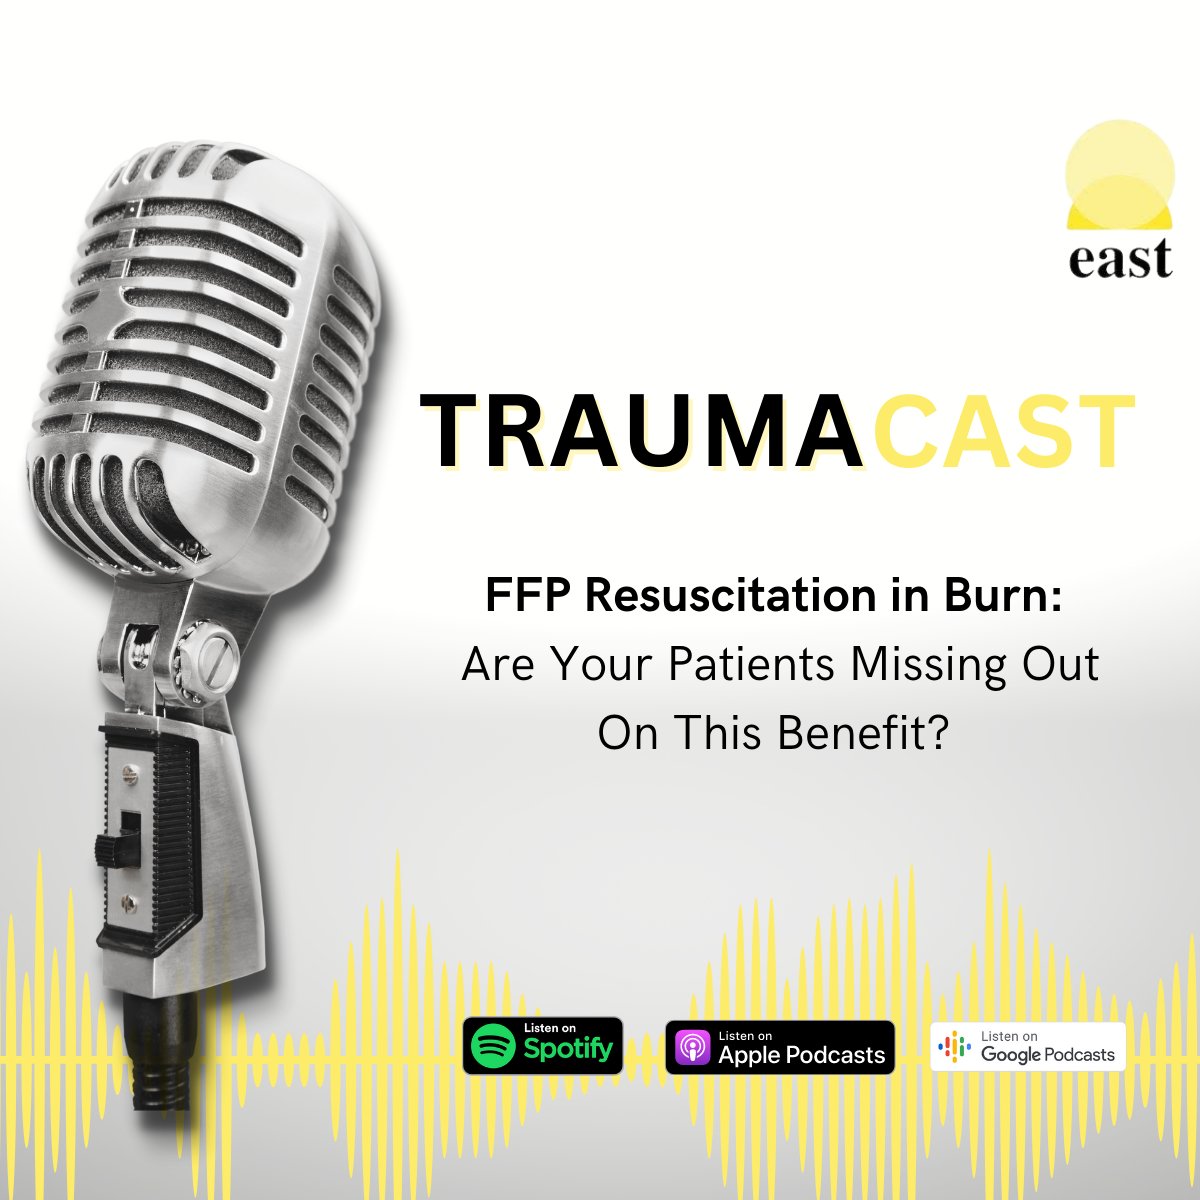 In this EAST Traumacast, join Drs. @TatiCPCardenas and @ldel302 as they discuss the history, role, potential benefits and implementation of FFP resuscitation as a strategy in burn patients w/ Drs. @ViennawithaB, Colonel Jennifer Gurney & @TinaPalmieri4: bit.ly/3kOr48D